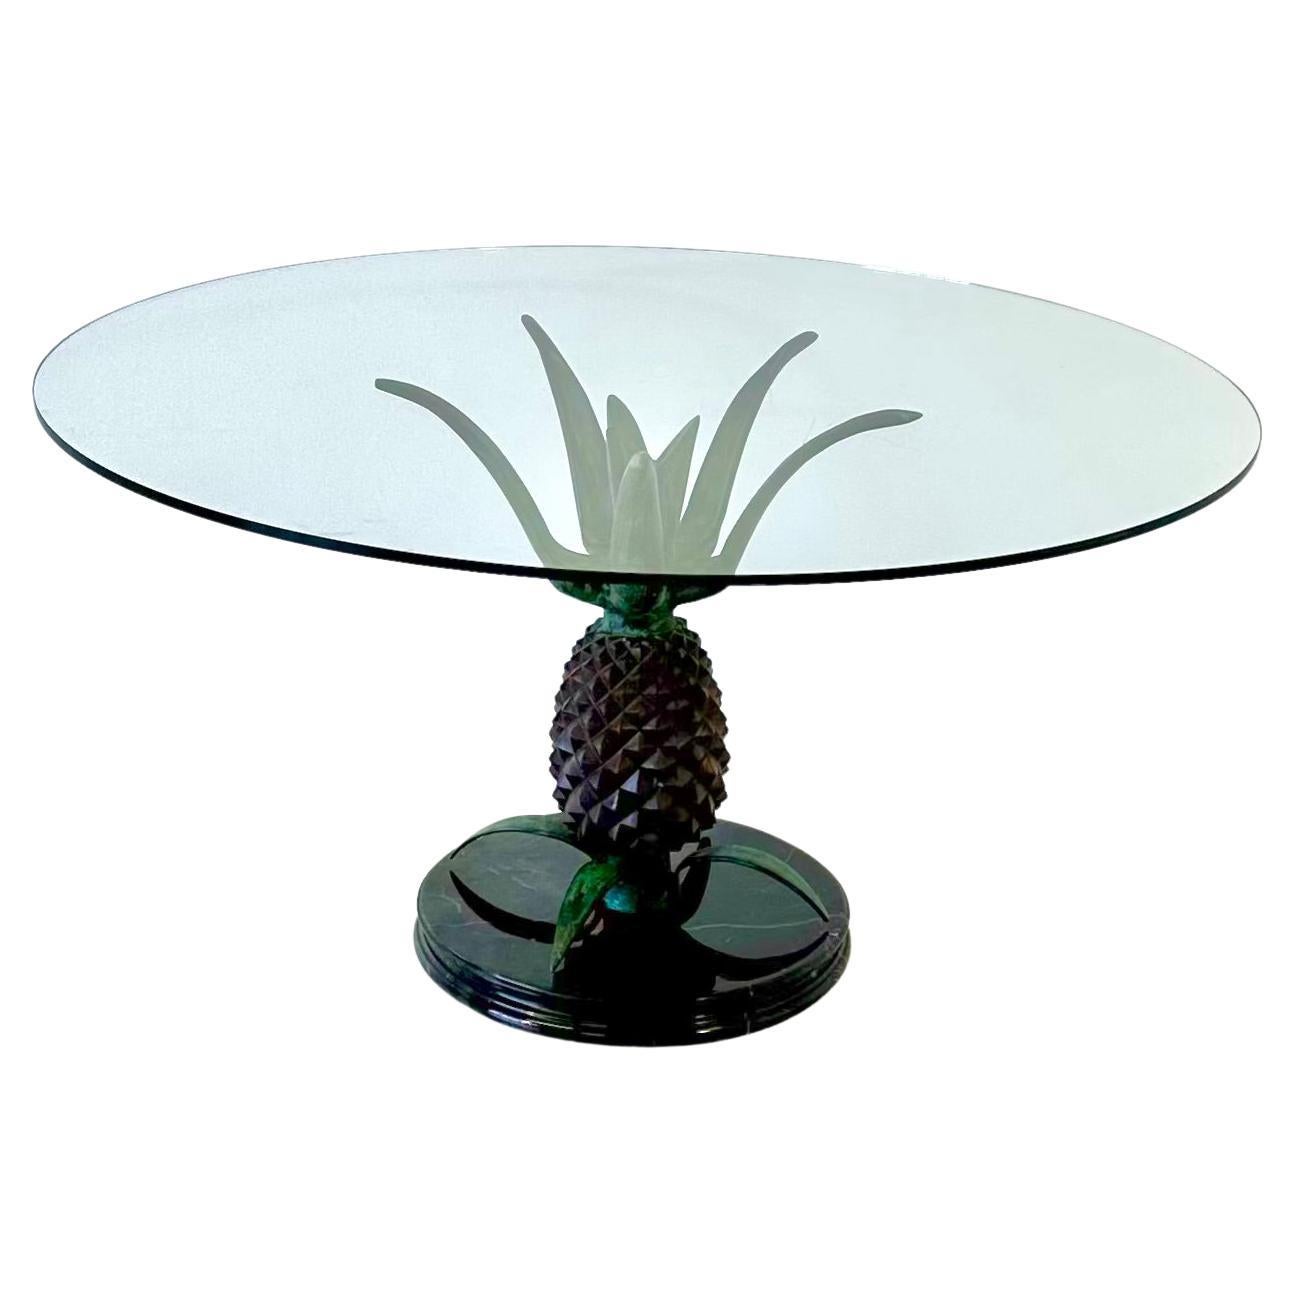 Sculptural Metal, Glass and Marble Pineapple Coffee Table, 1970s, Maison Jansen